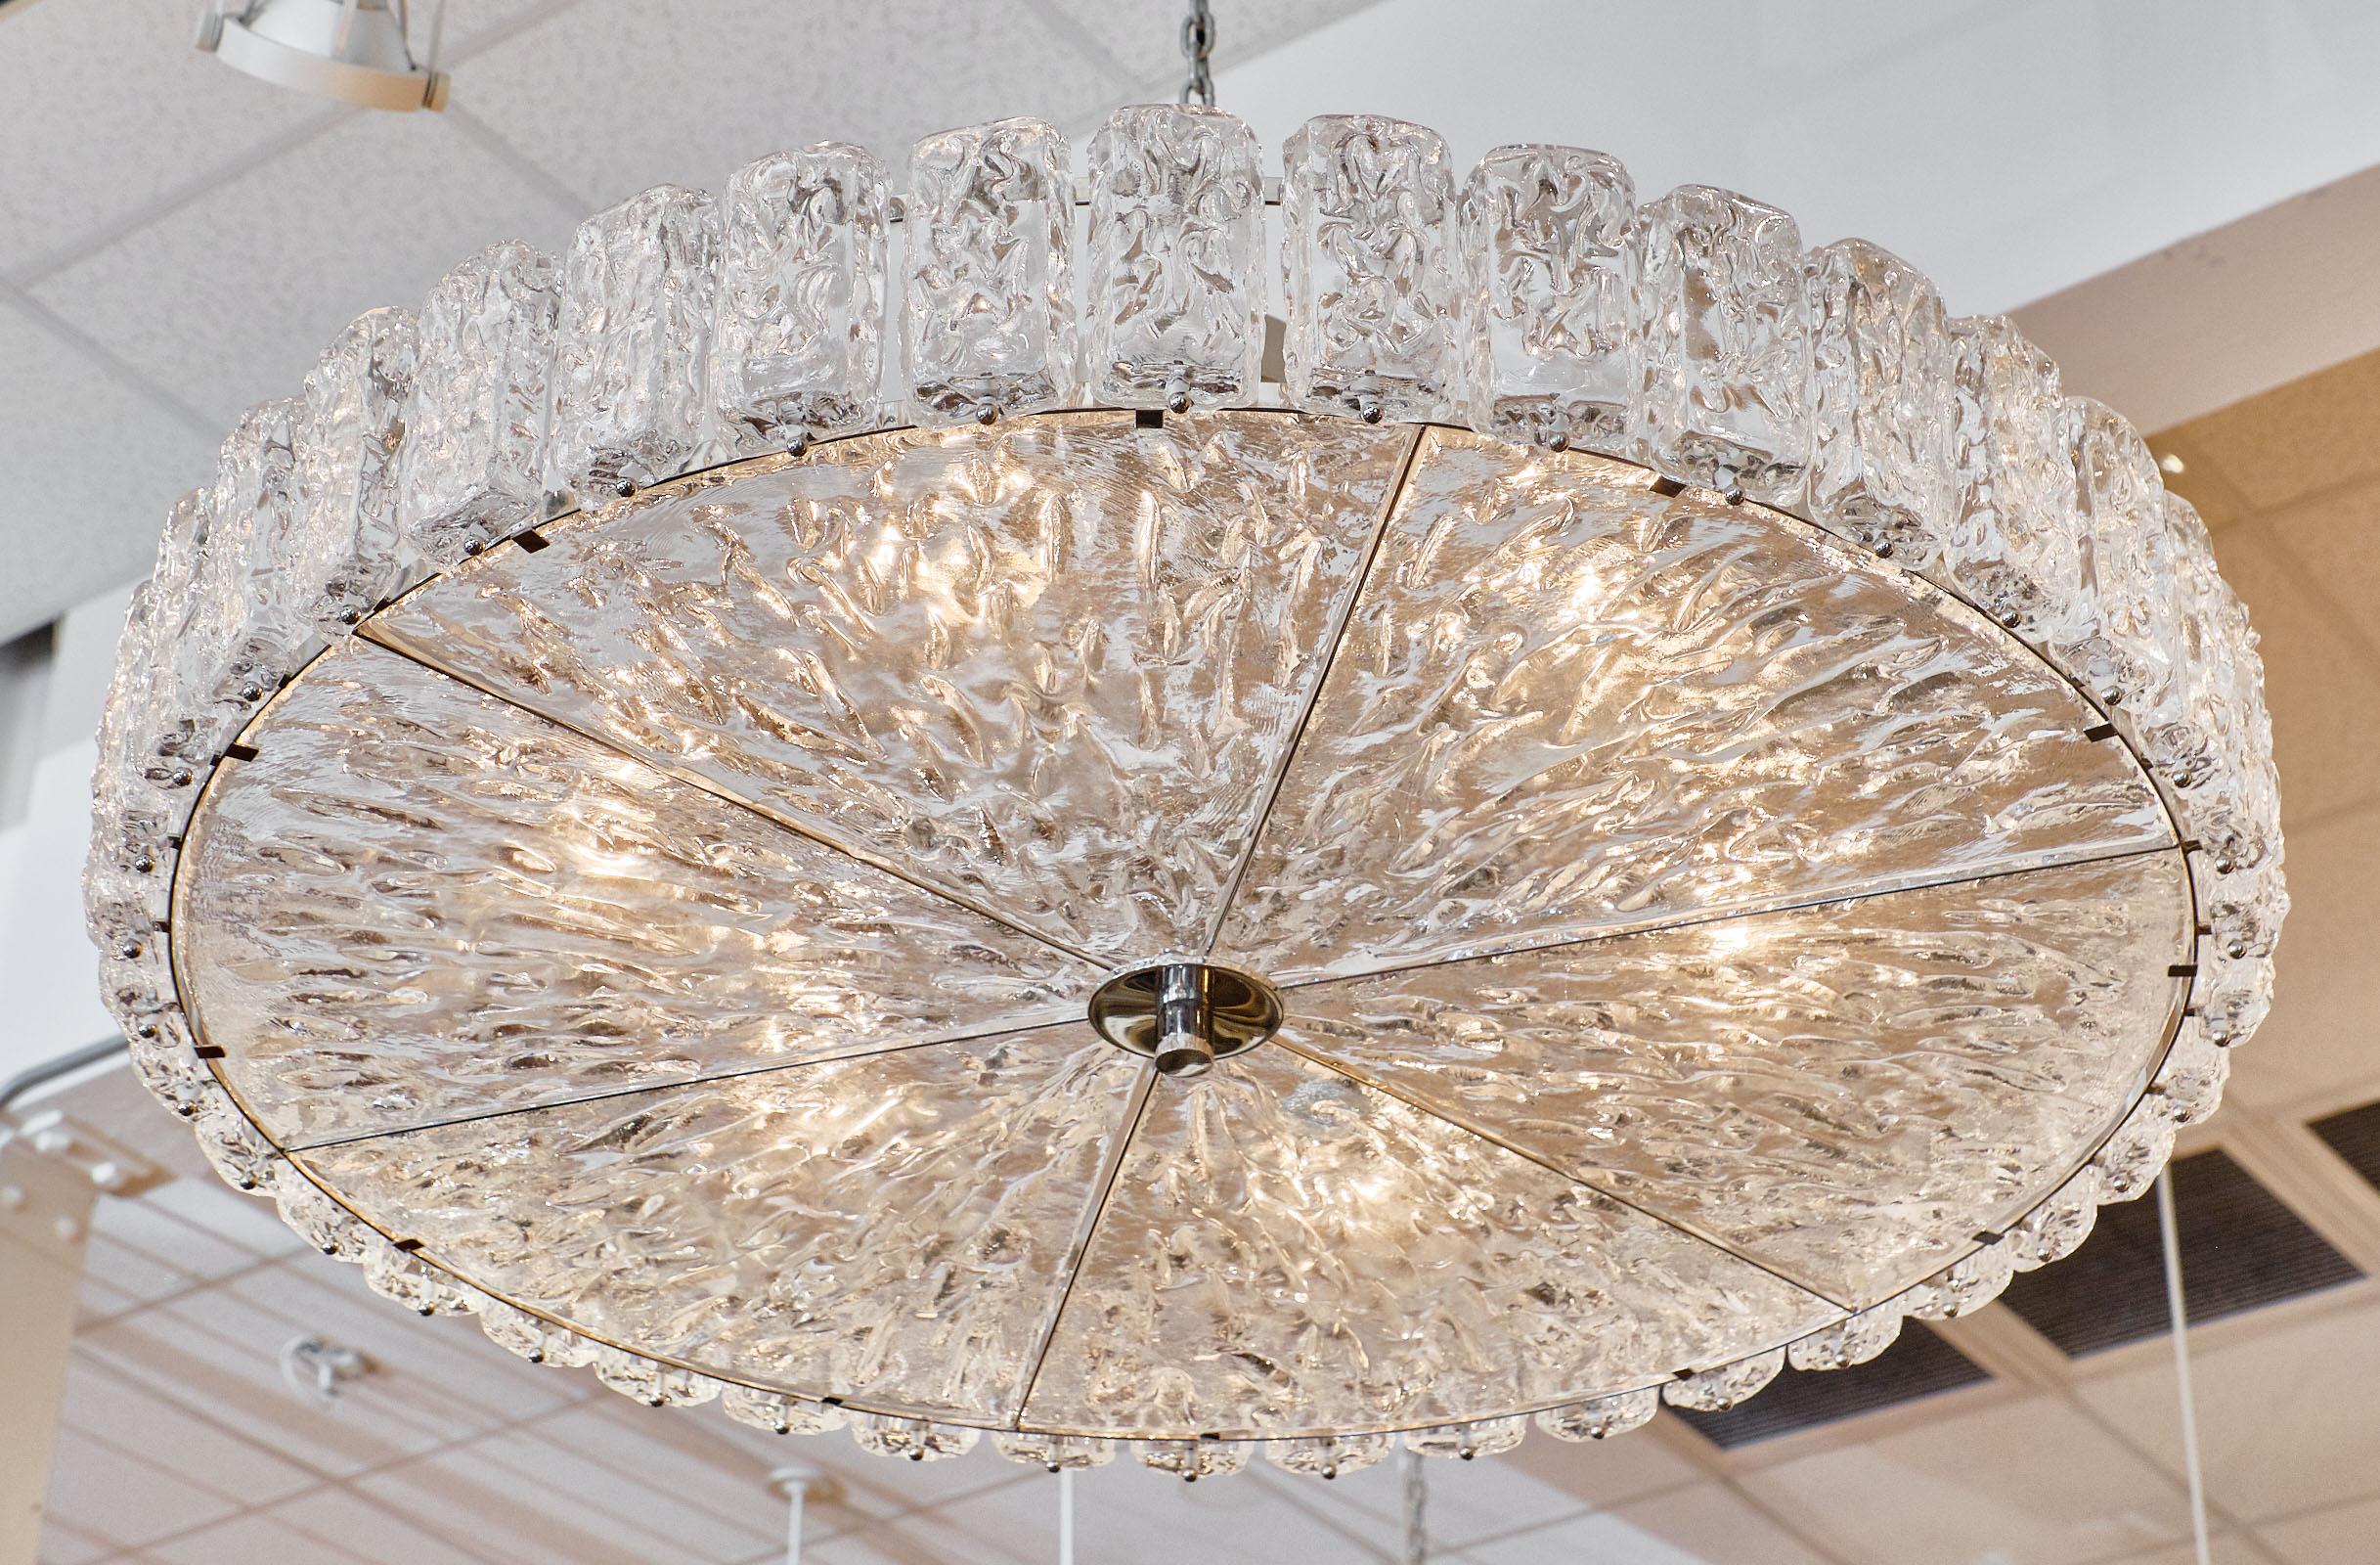 Murano glass “Piastre” chandelier with hand blown textured glass components. We love the ice effect of the pieces! This fixture has been newly wired to fit US standards. The current height from ceiling is 15.625”.

This piece is currently located at